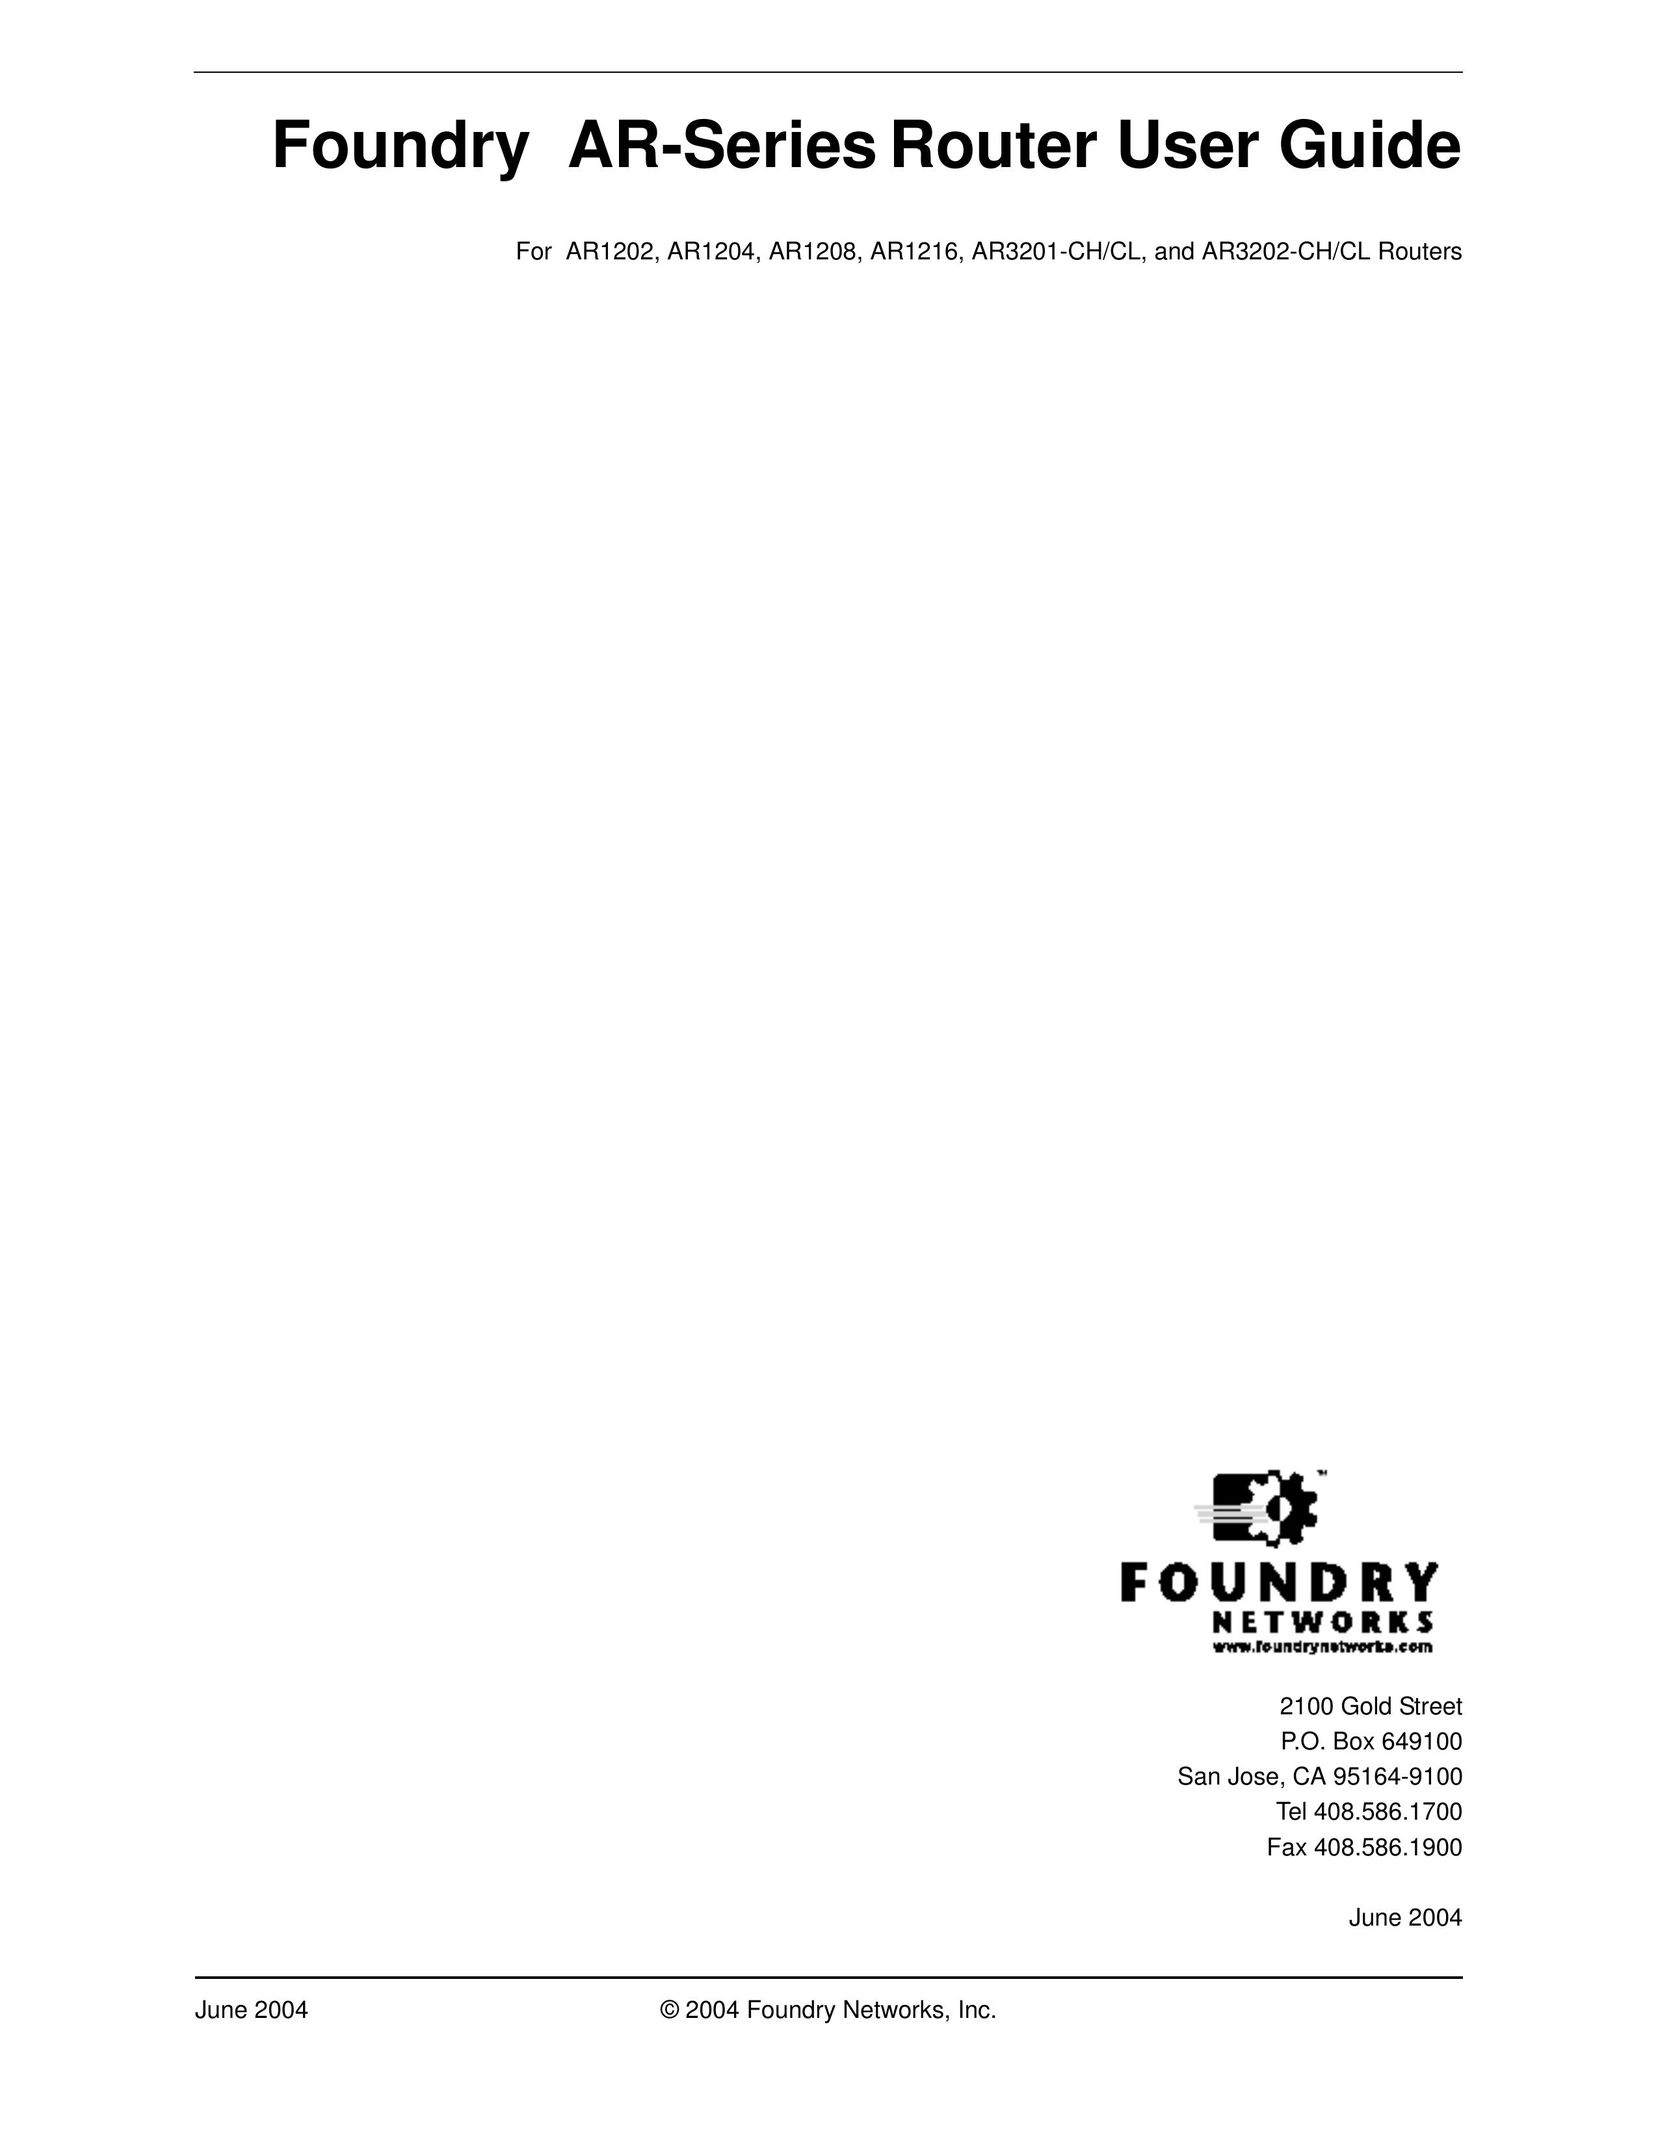 Foundry Networks AR1202 Network Router User Manual